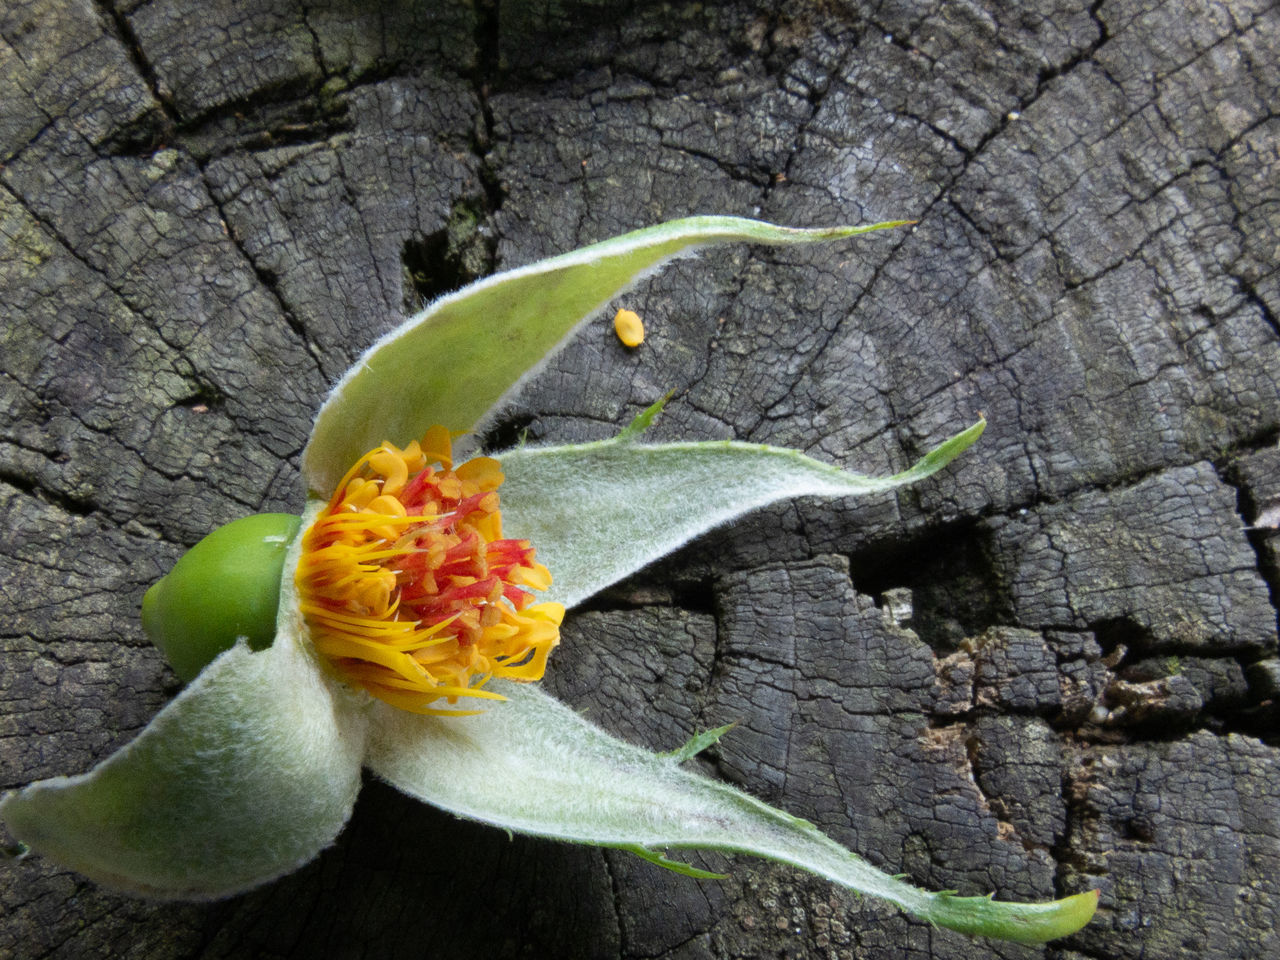 CLOSE-UP OF FRESH YELLOW FLOWER AGAINST WALL